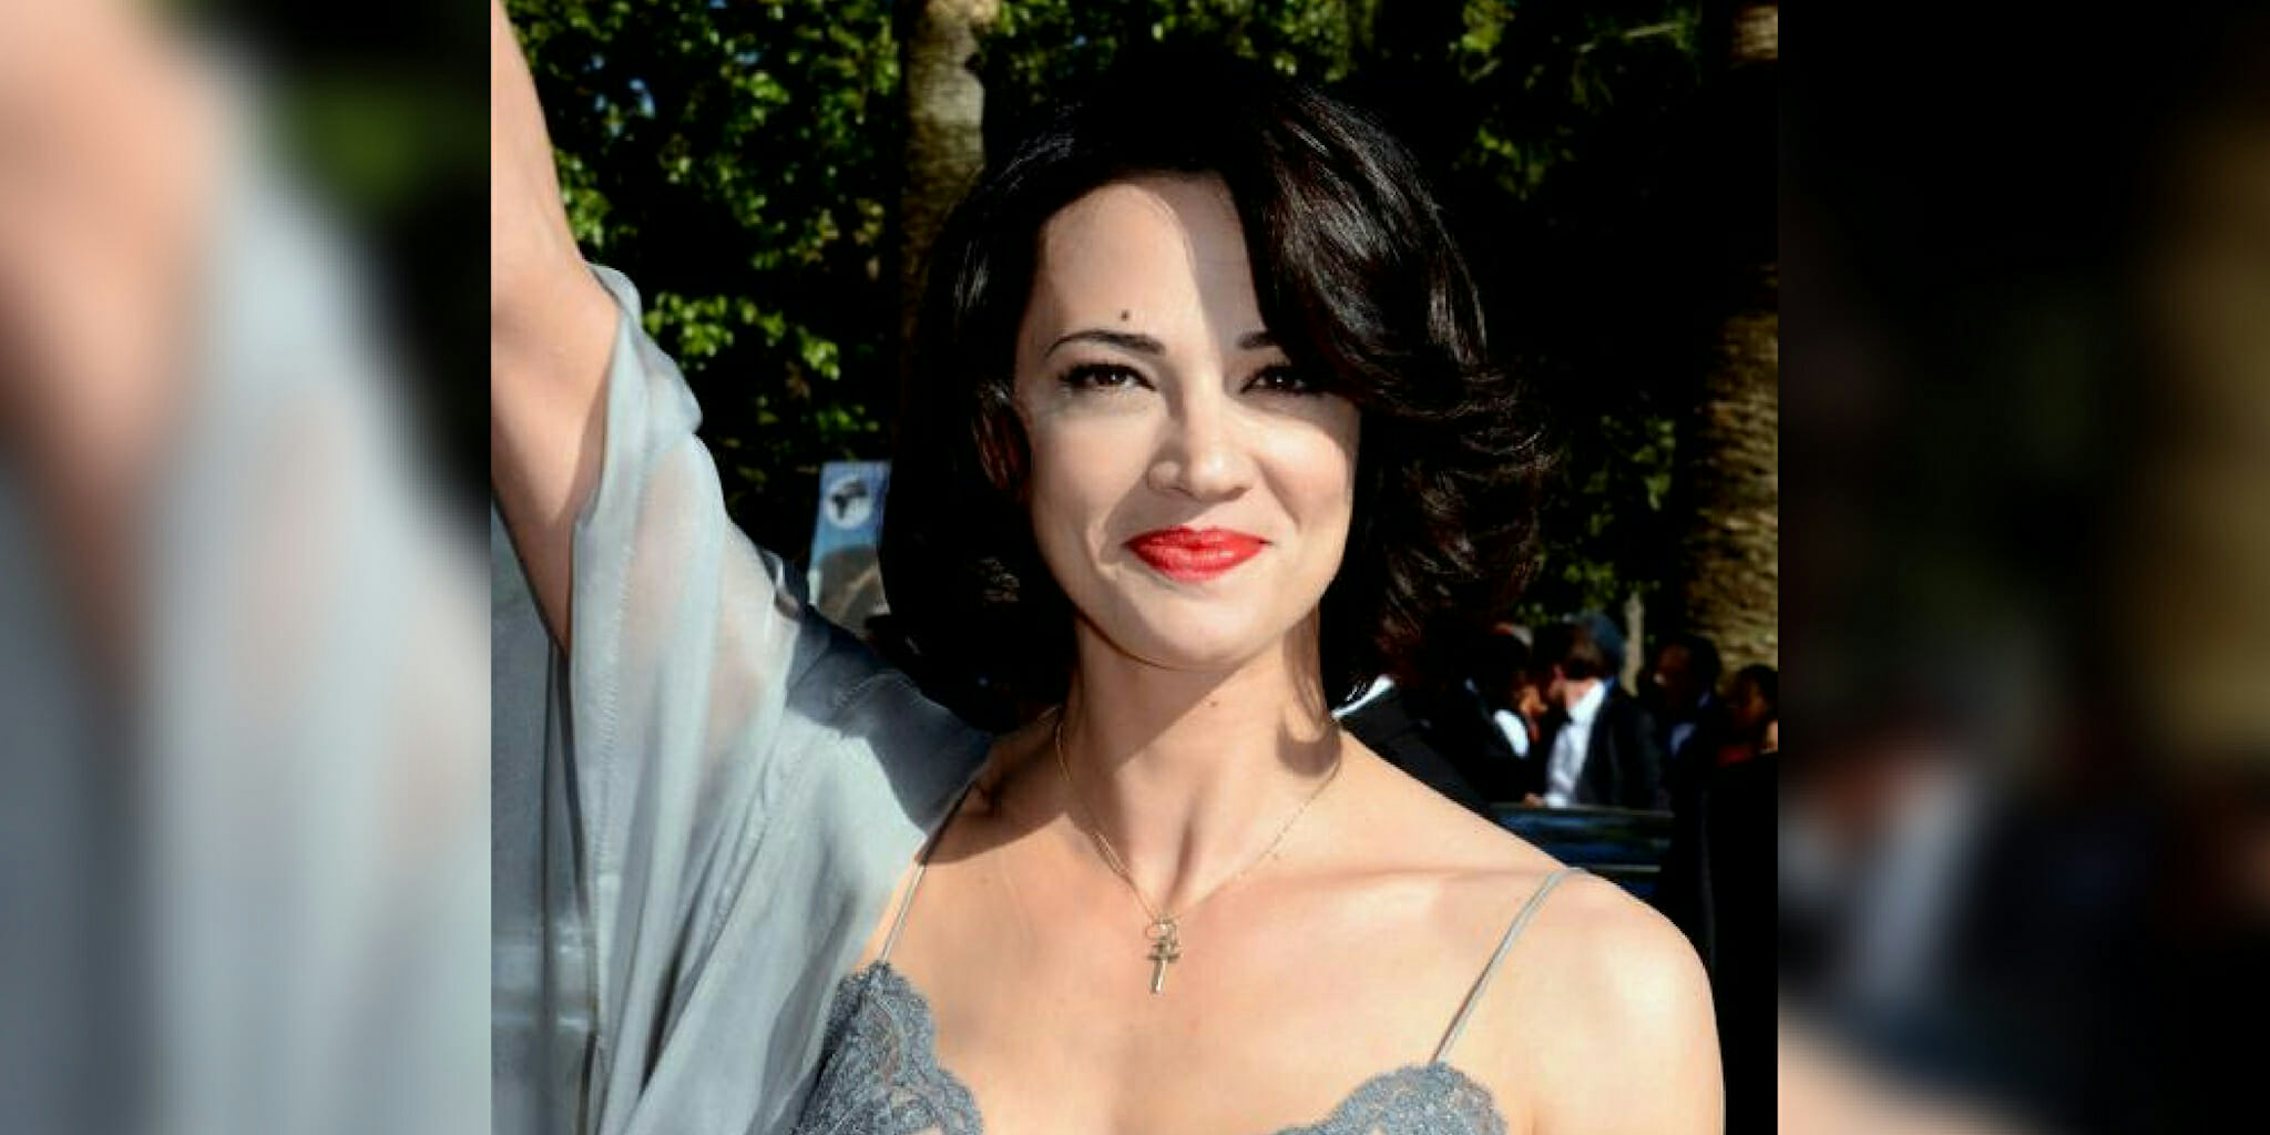 Asia Argento at the Cannes film festival 2013.